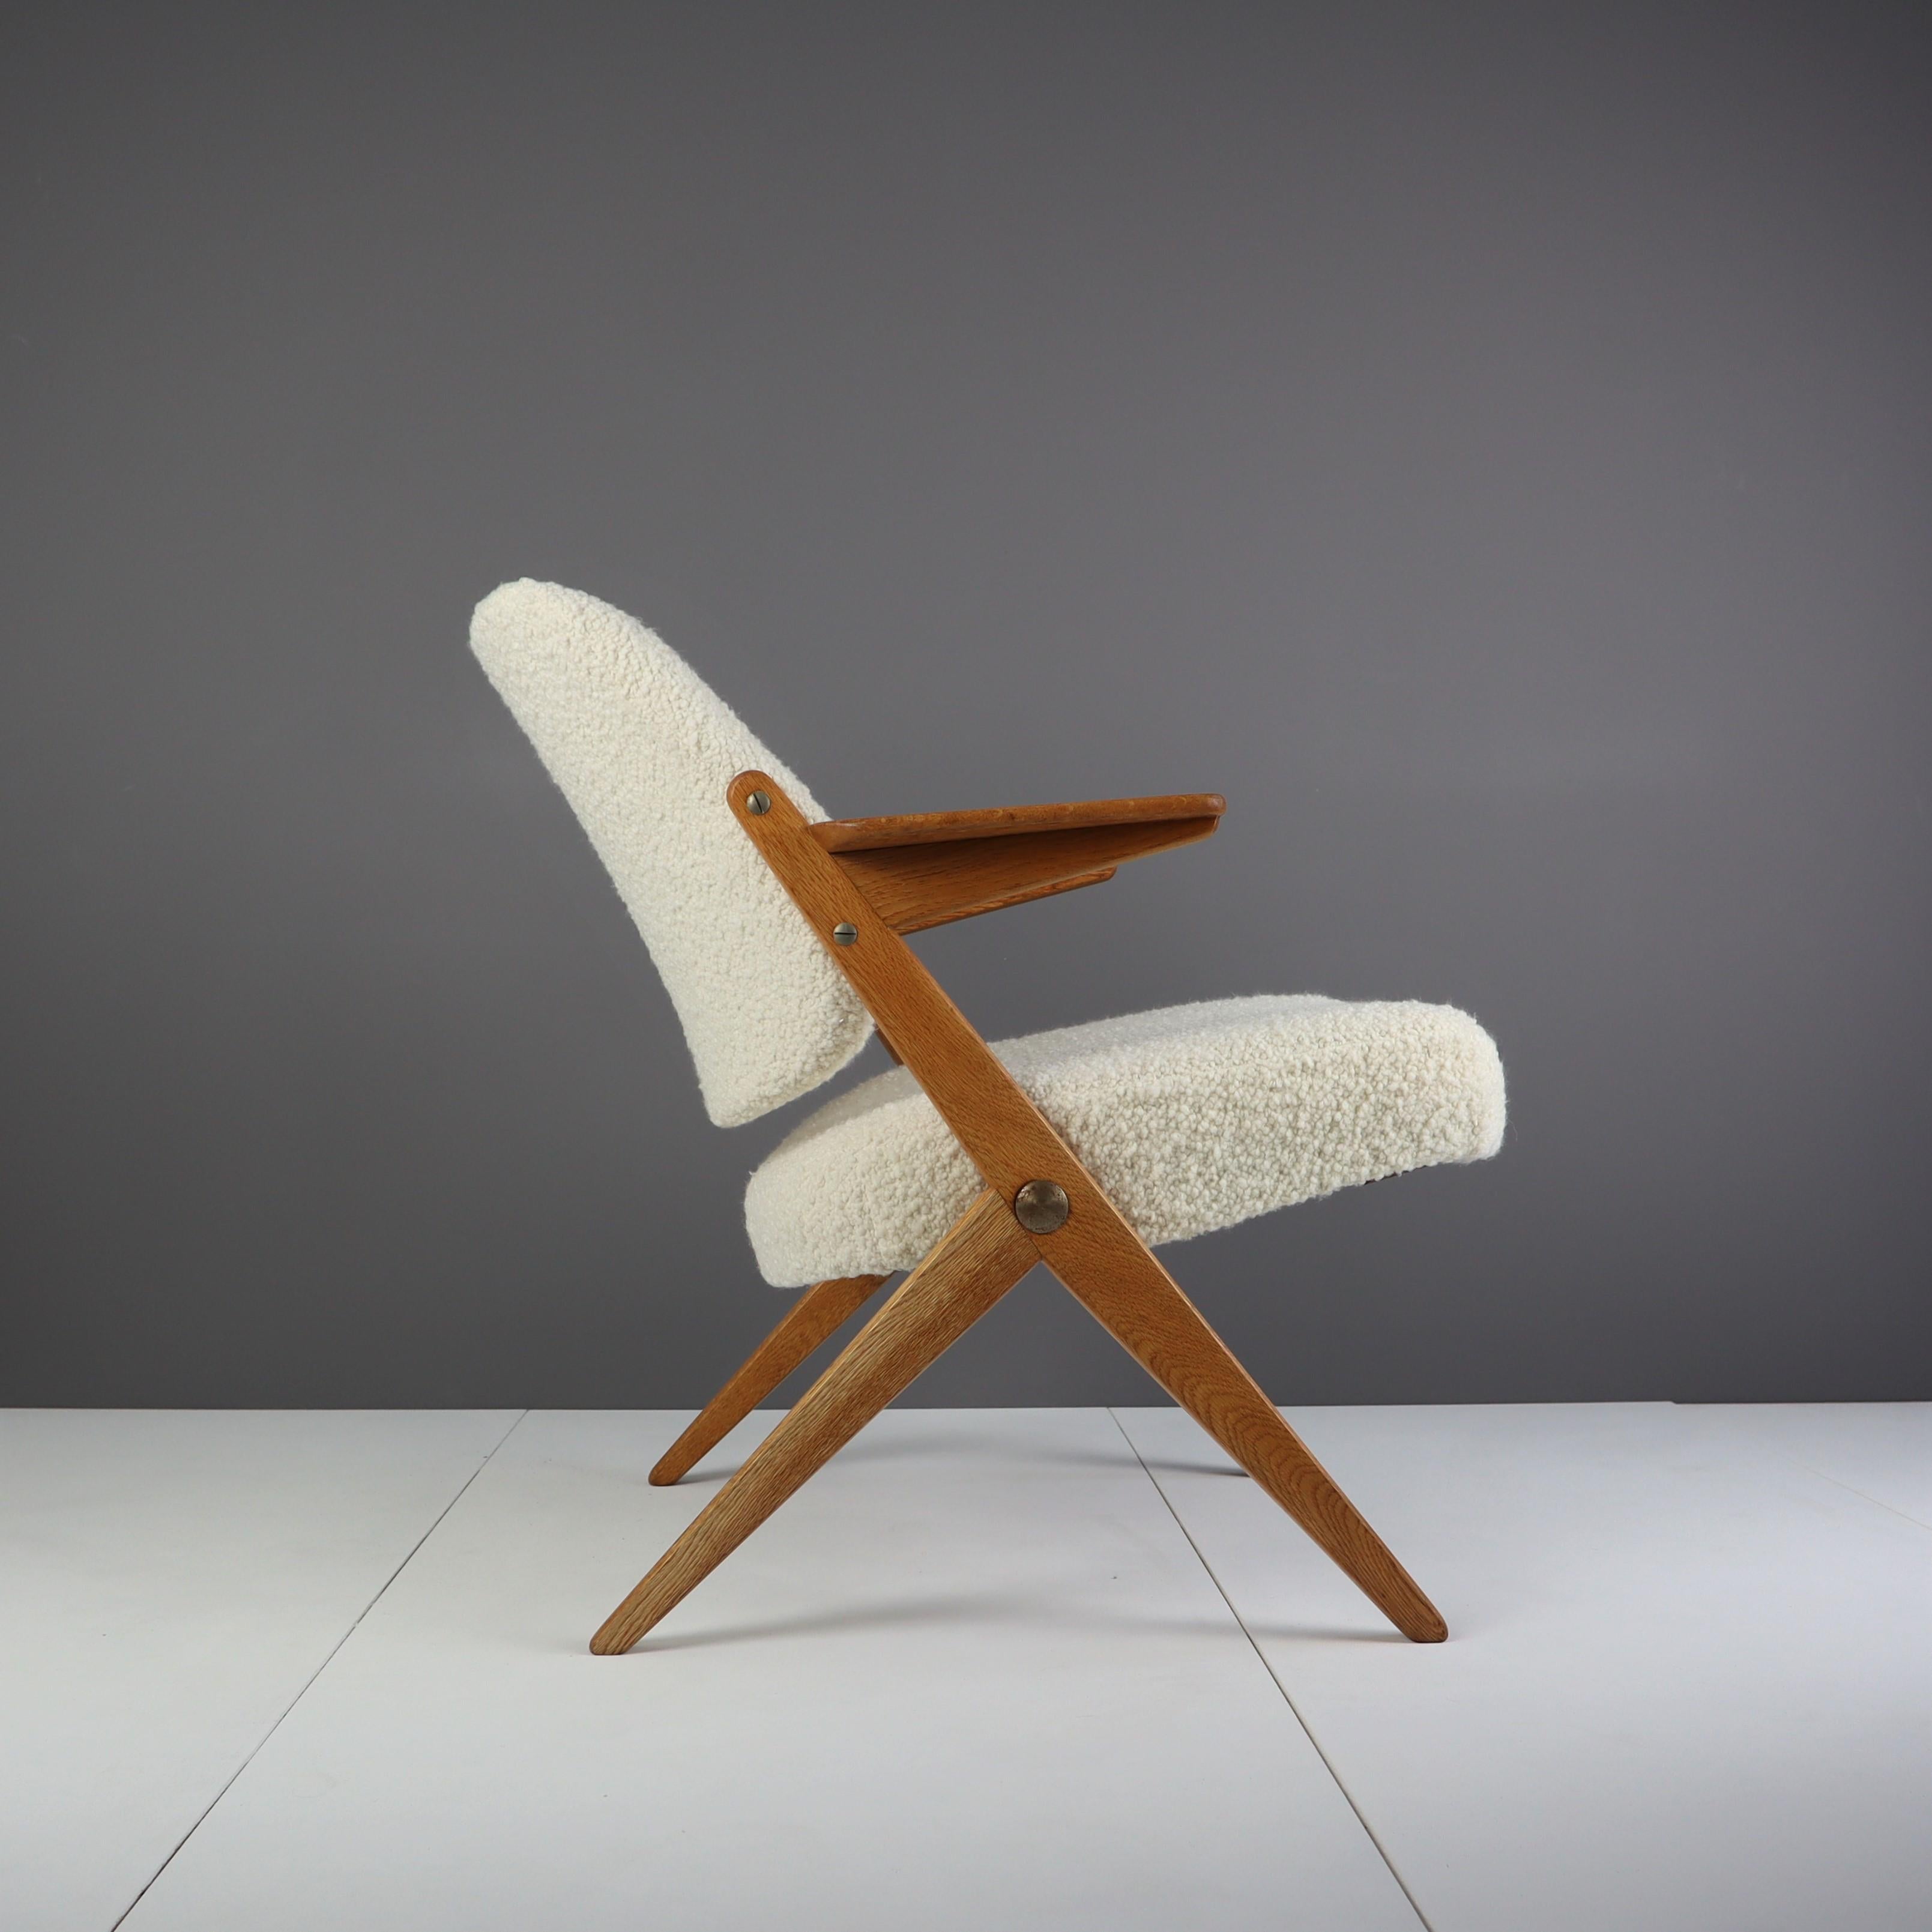 A rare Bengt Ruda midcentury oak armchair reupholstered with an Italian off-white bouclé fabric from Designers Guild’s Lana collection.

We bought this chair at an auction in Malmö, Sweden in March 2022. We have a penchant for midcentury Swedish